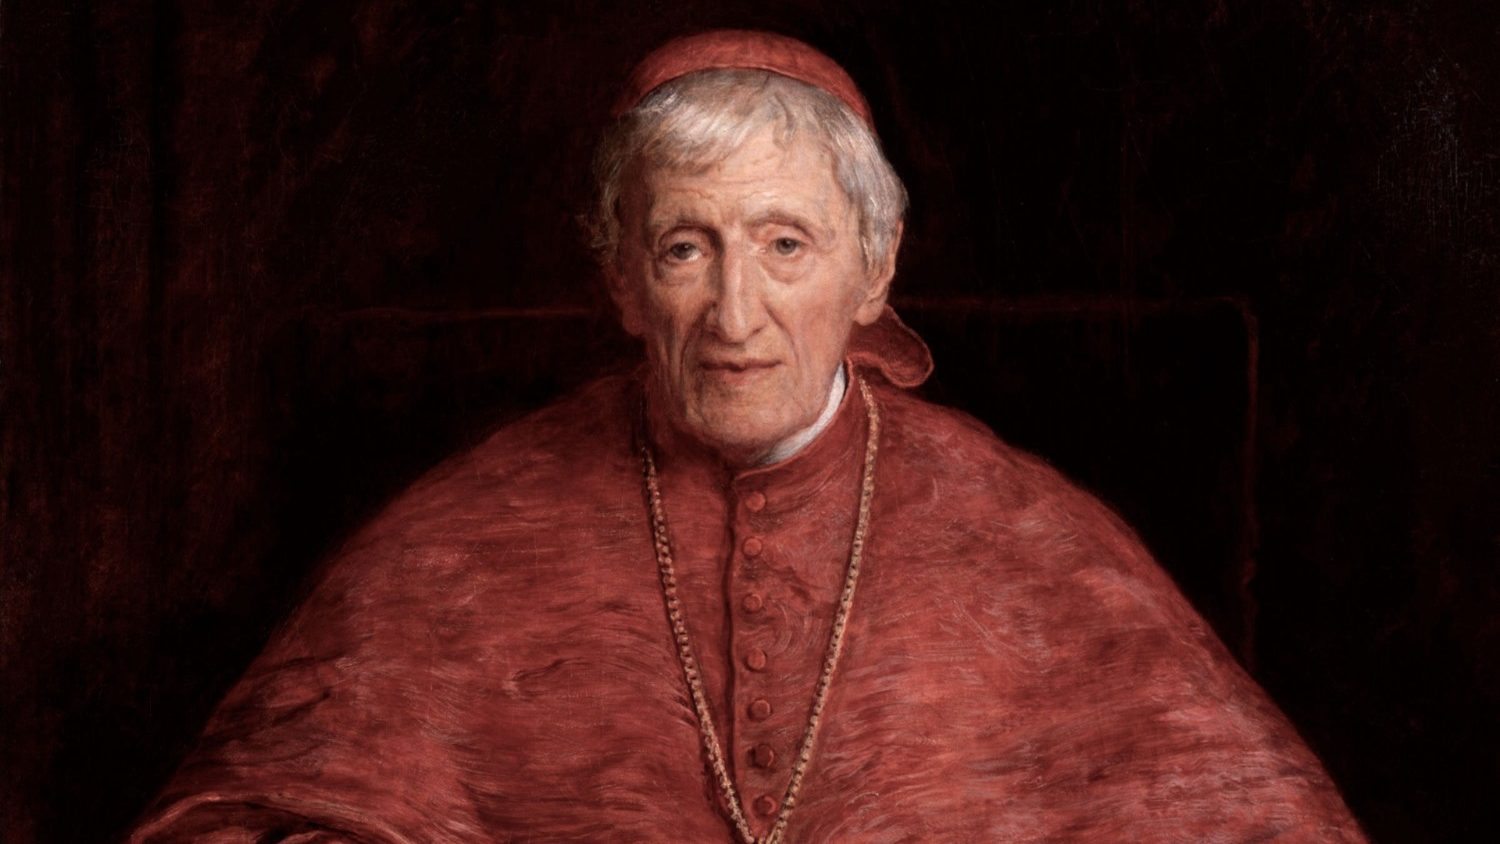 A painting of Cardinal Newman from the Vatican News site.